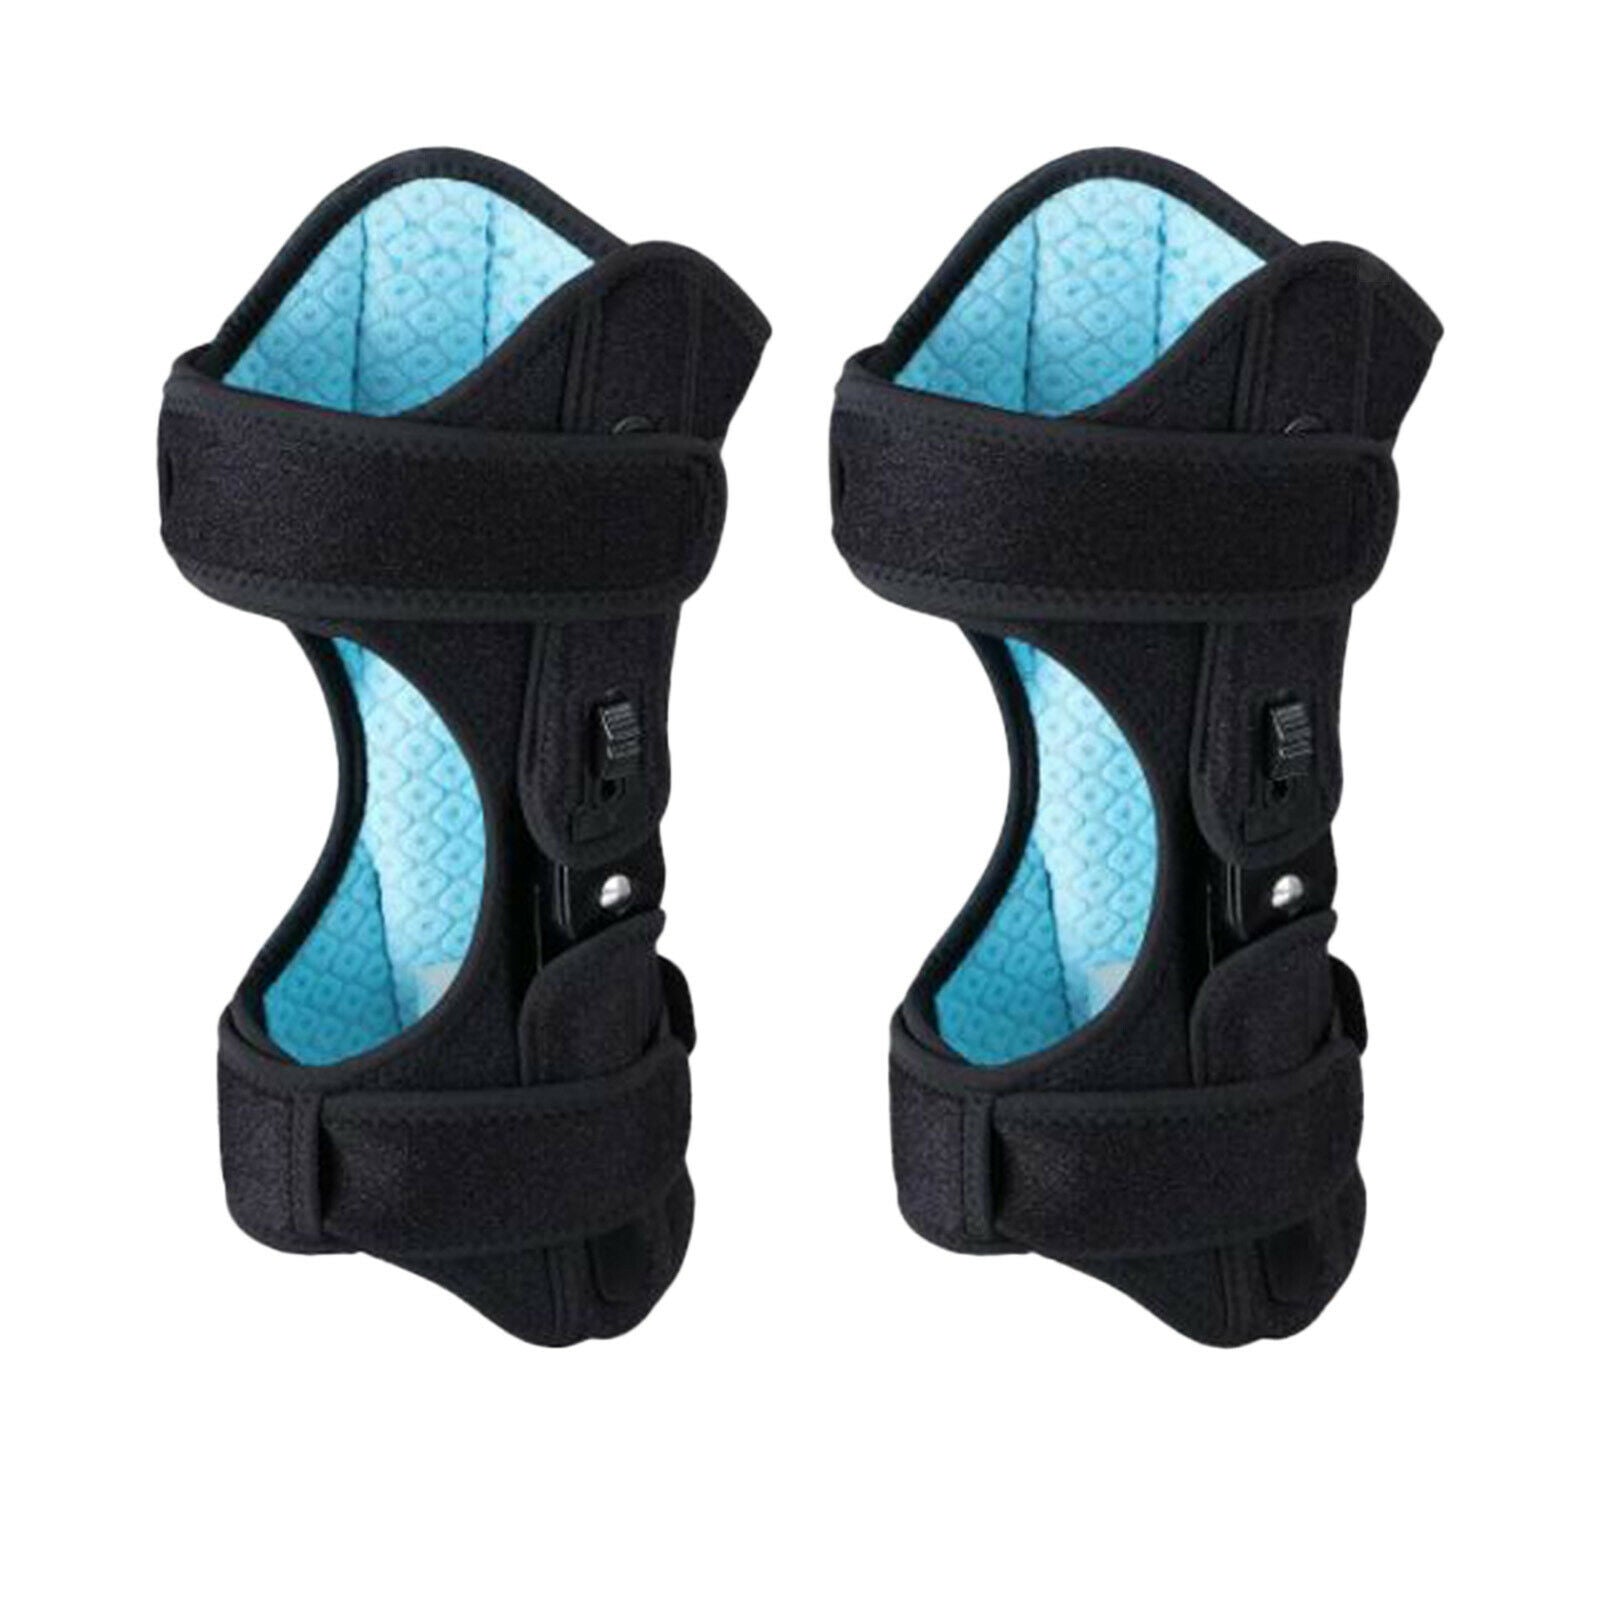 2x Knee Protection Booster Leg Joint Knee Sleeve Support for Climbing Black